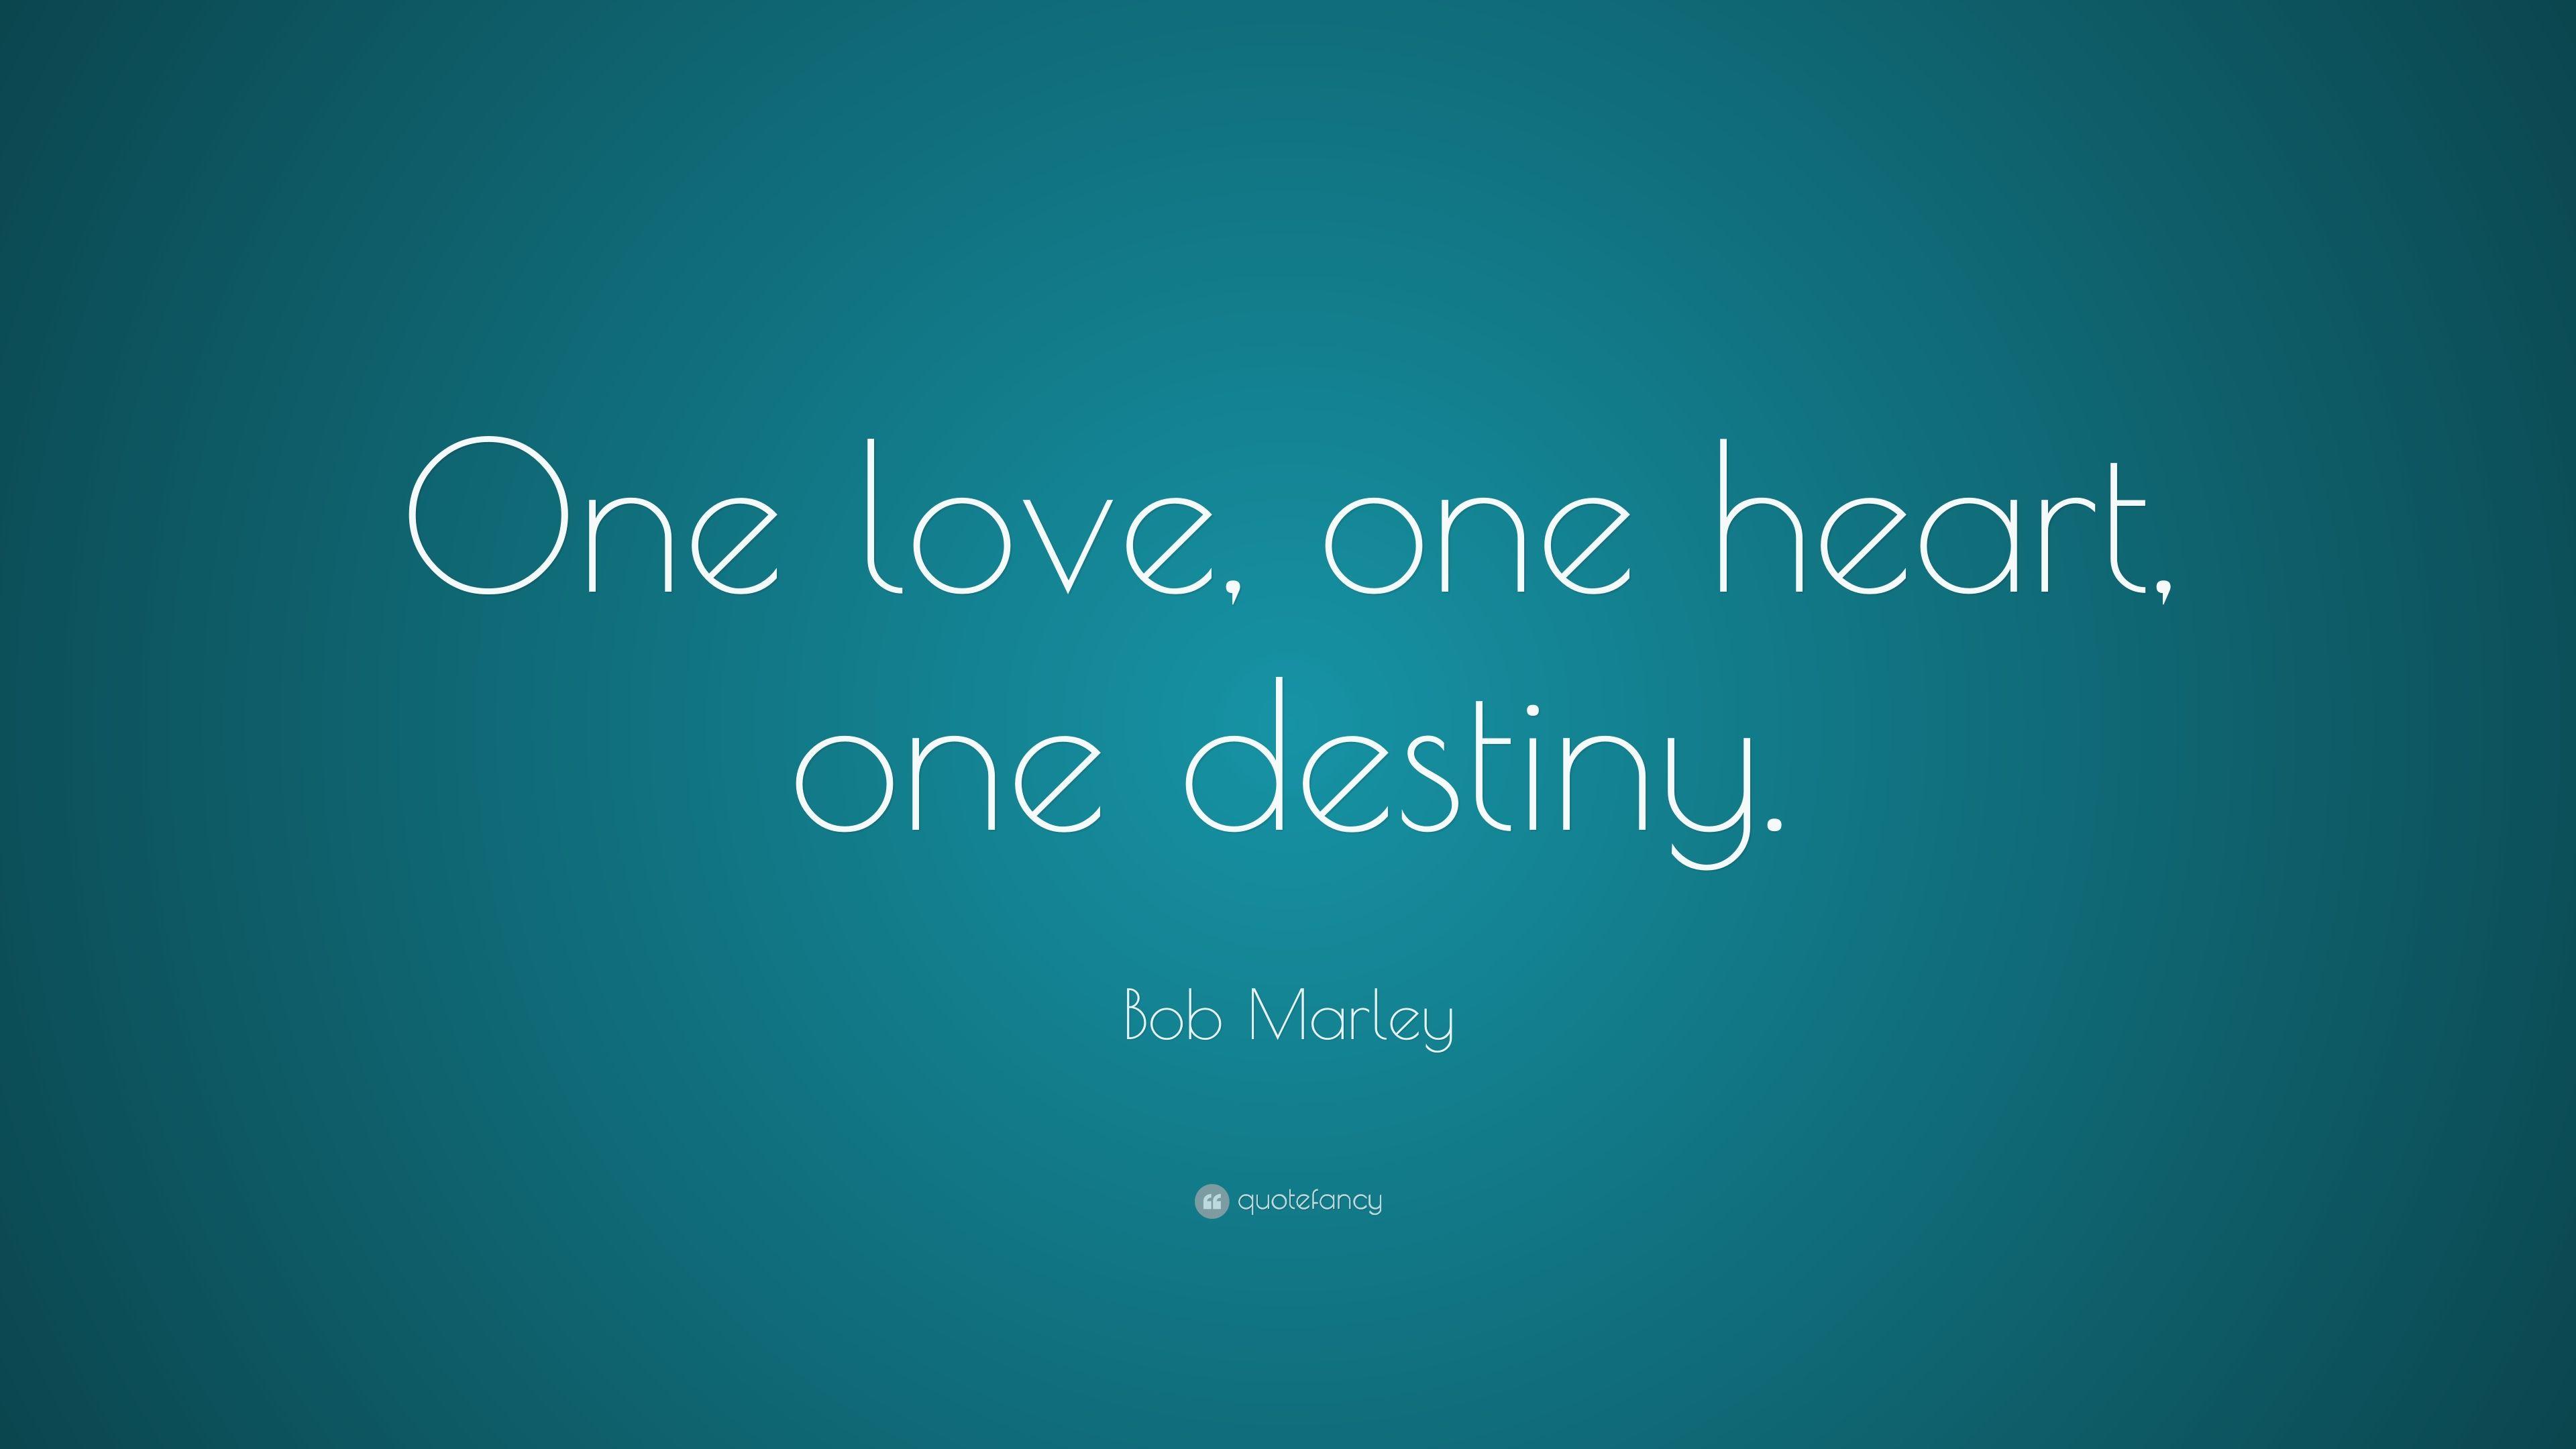 Bob Marley Quote: “One love, one heart, one destiny.” 22 wallpaper